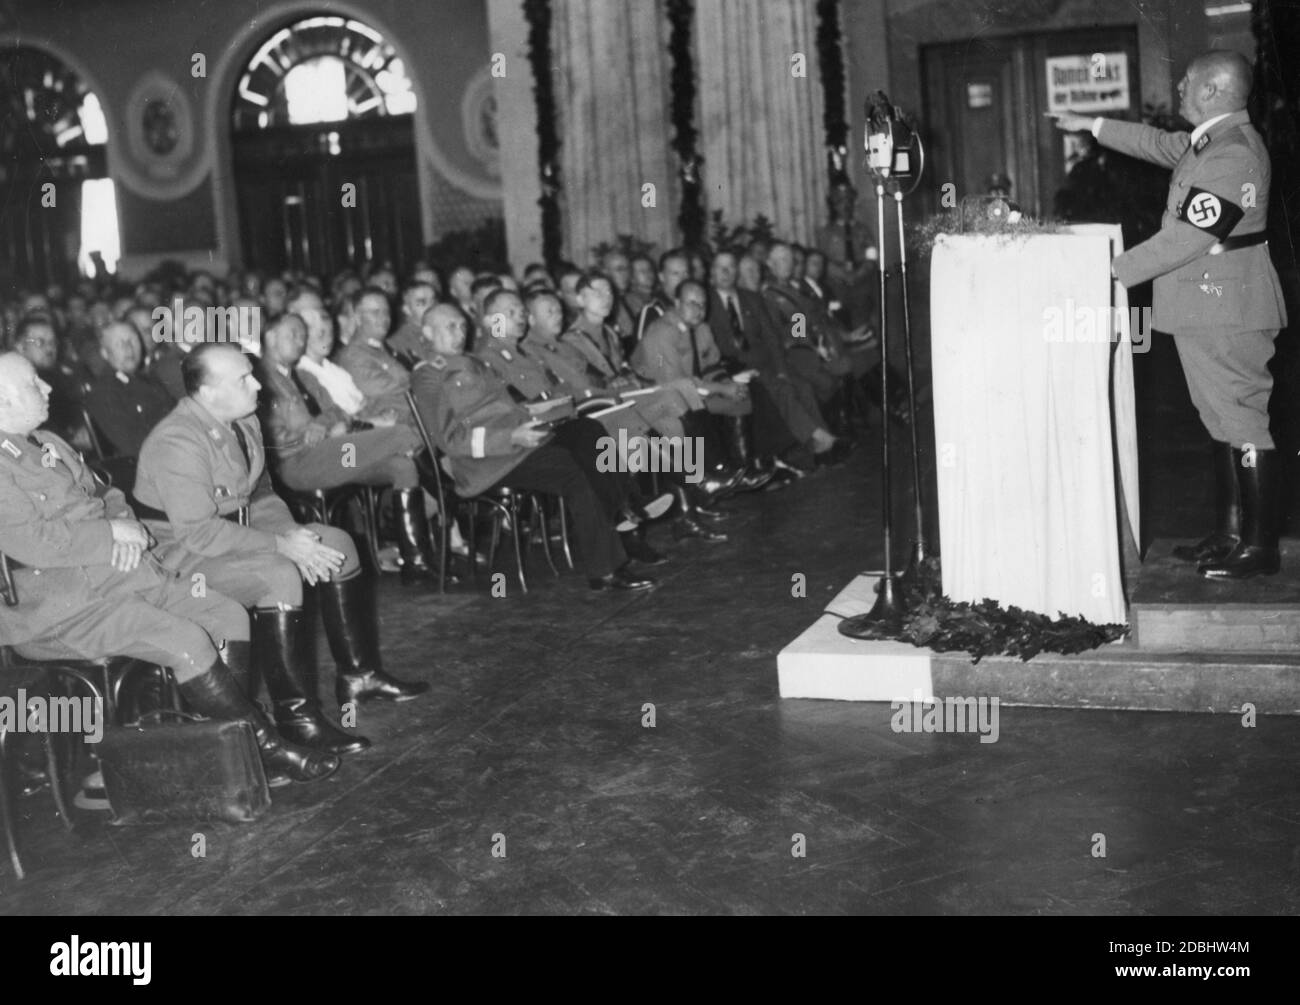 Gauleiter Julius Streicher gives a speech at the conference of the Reichsrechtsamt (Reich Justice Office) of the NSDAP and the Bund Nationalsozialistischer Deutscher Juristen (National Socialist Association of Legal Professionals) in the Nuremberg Kulturvereinshaus. In the front row, 2nd from left, Hans Frank, next to him is probably Walter Raeke. Stock Photo